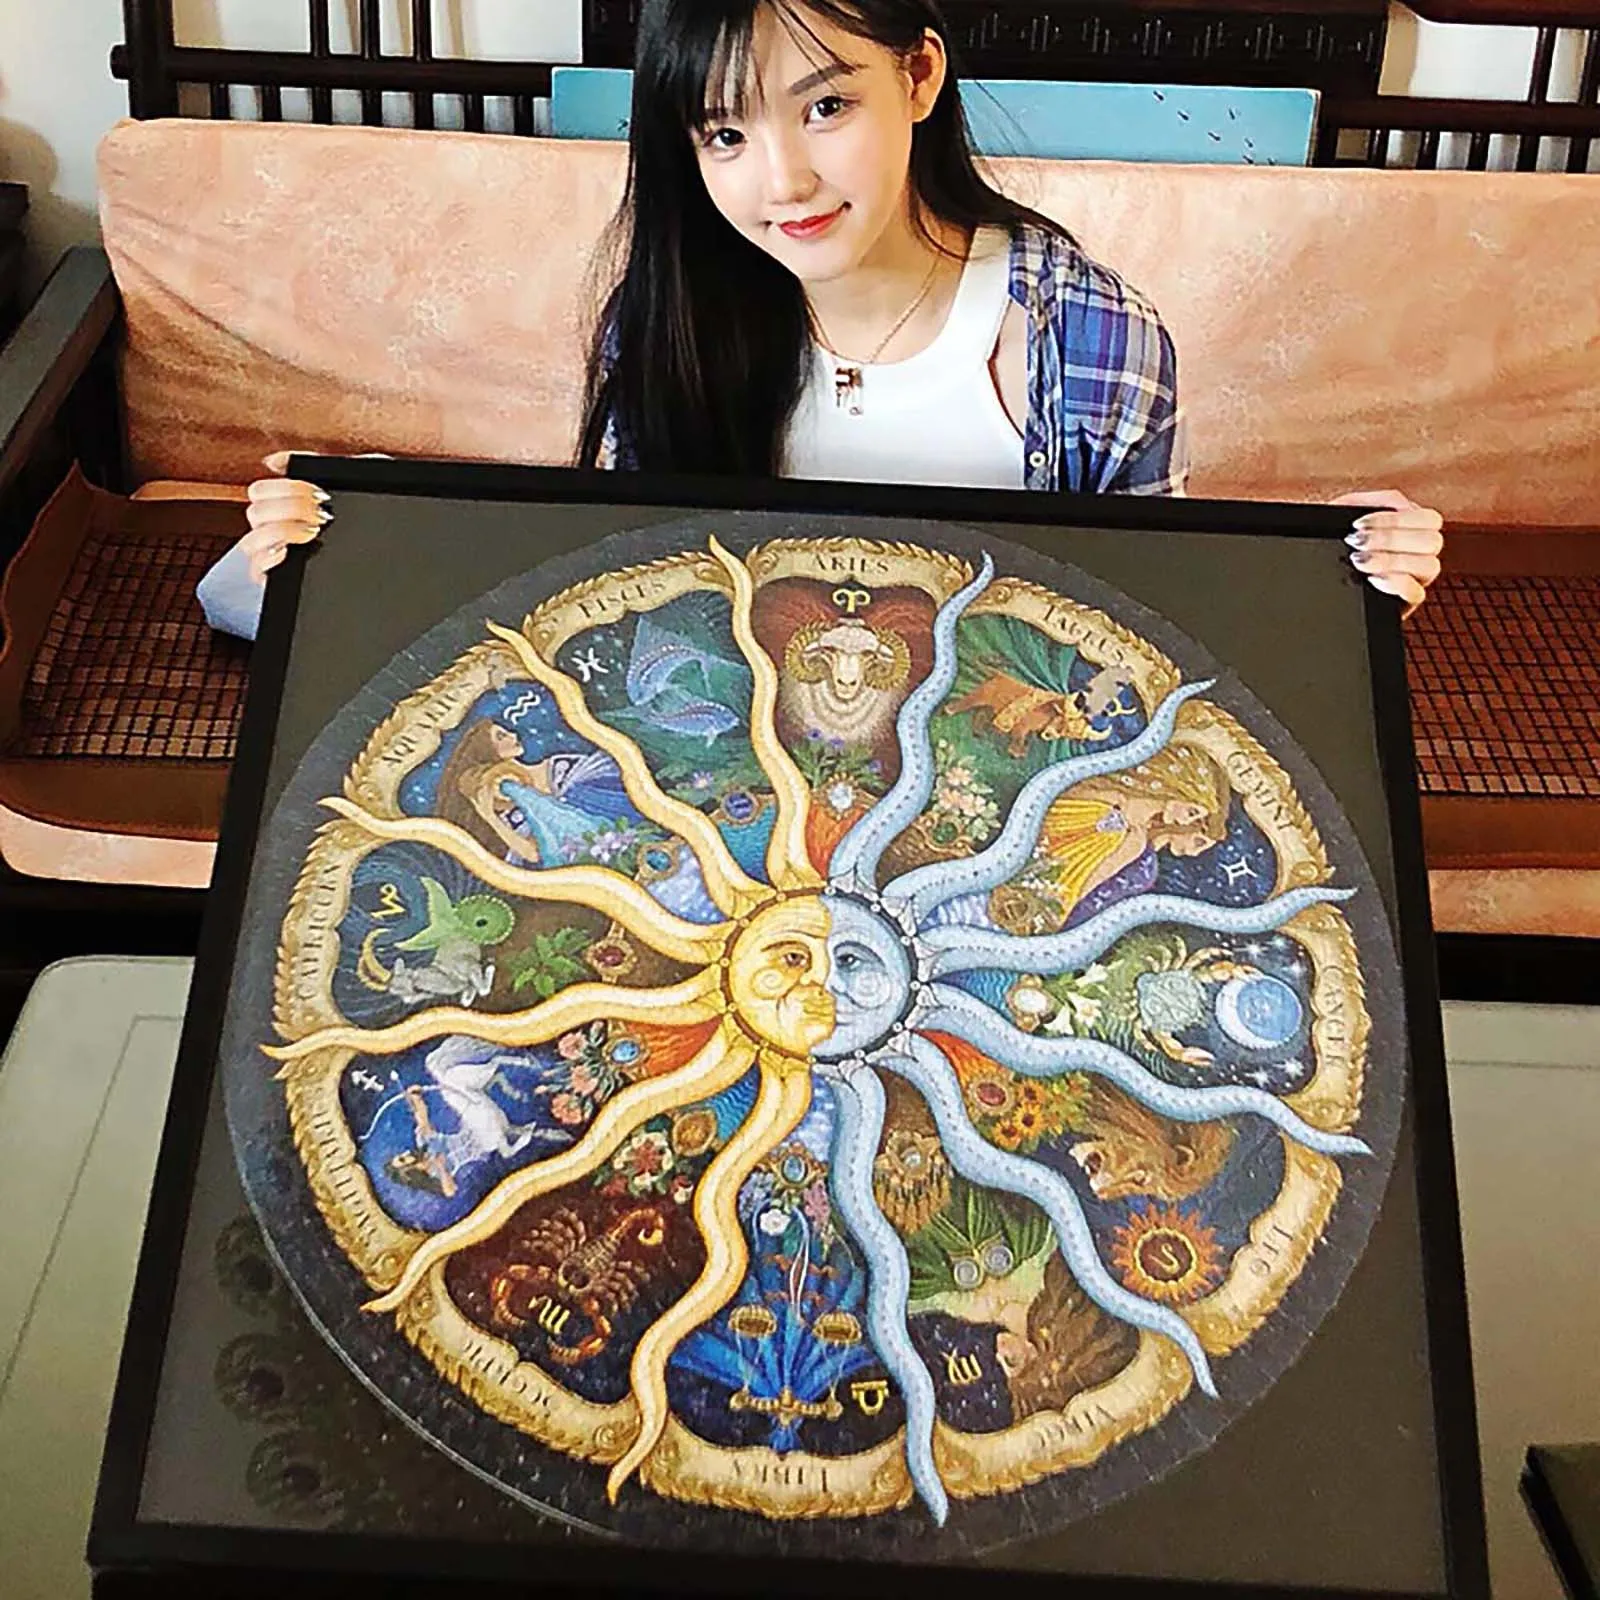 Educational Intellectual Decompressing Fun Game for Kids Adults Toy 26.8 inch 1000 Pieces Puzzles Jigsaw Puzzles-Round Zodiac Horoscope 